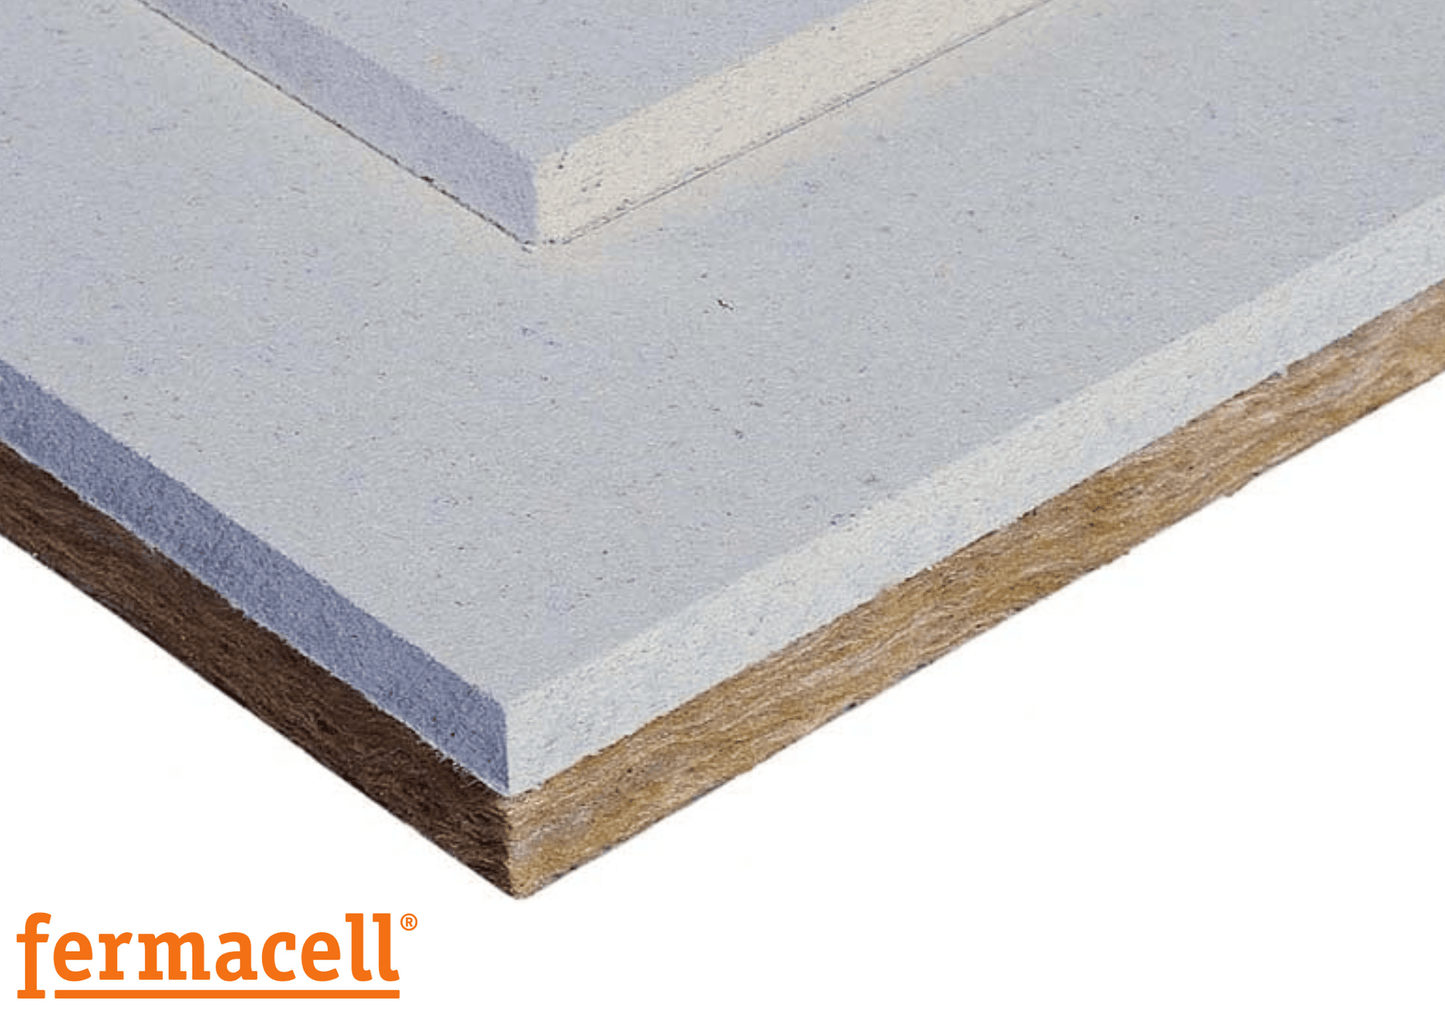 Fermacell Fermacell® Acoustic Flooring 2e31 1500 x 500 mm x 30mm